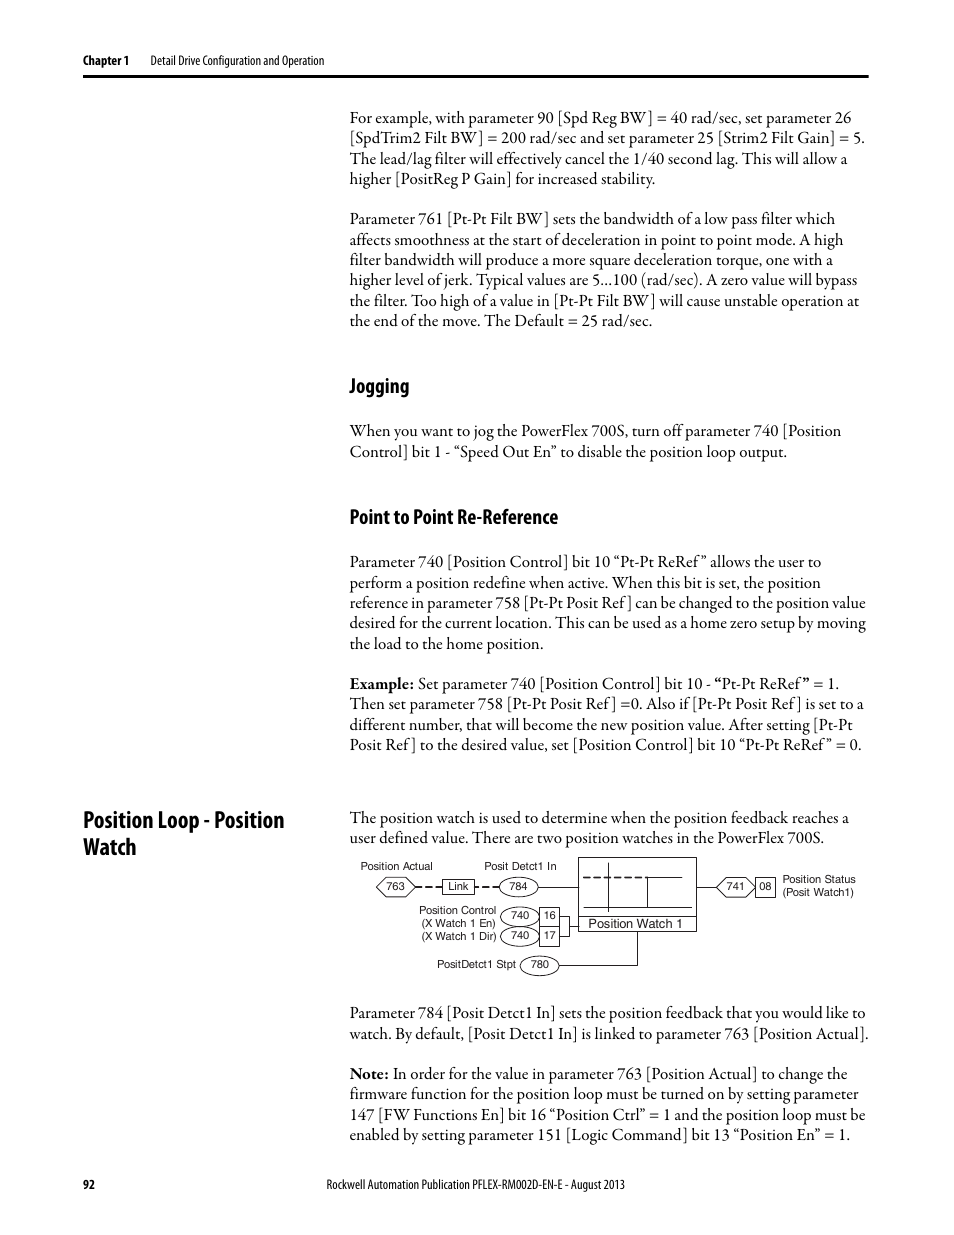 Jogging, Point to point re-reference, Position loop - position watch | Jogging point to point re-reference | Rockwell Automation 20D PowerFlex 700S with Phase I Control Reference Manual User Manual | Page 92 / 190